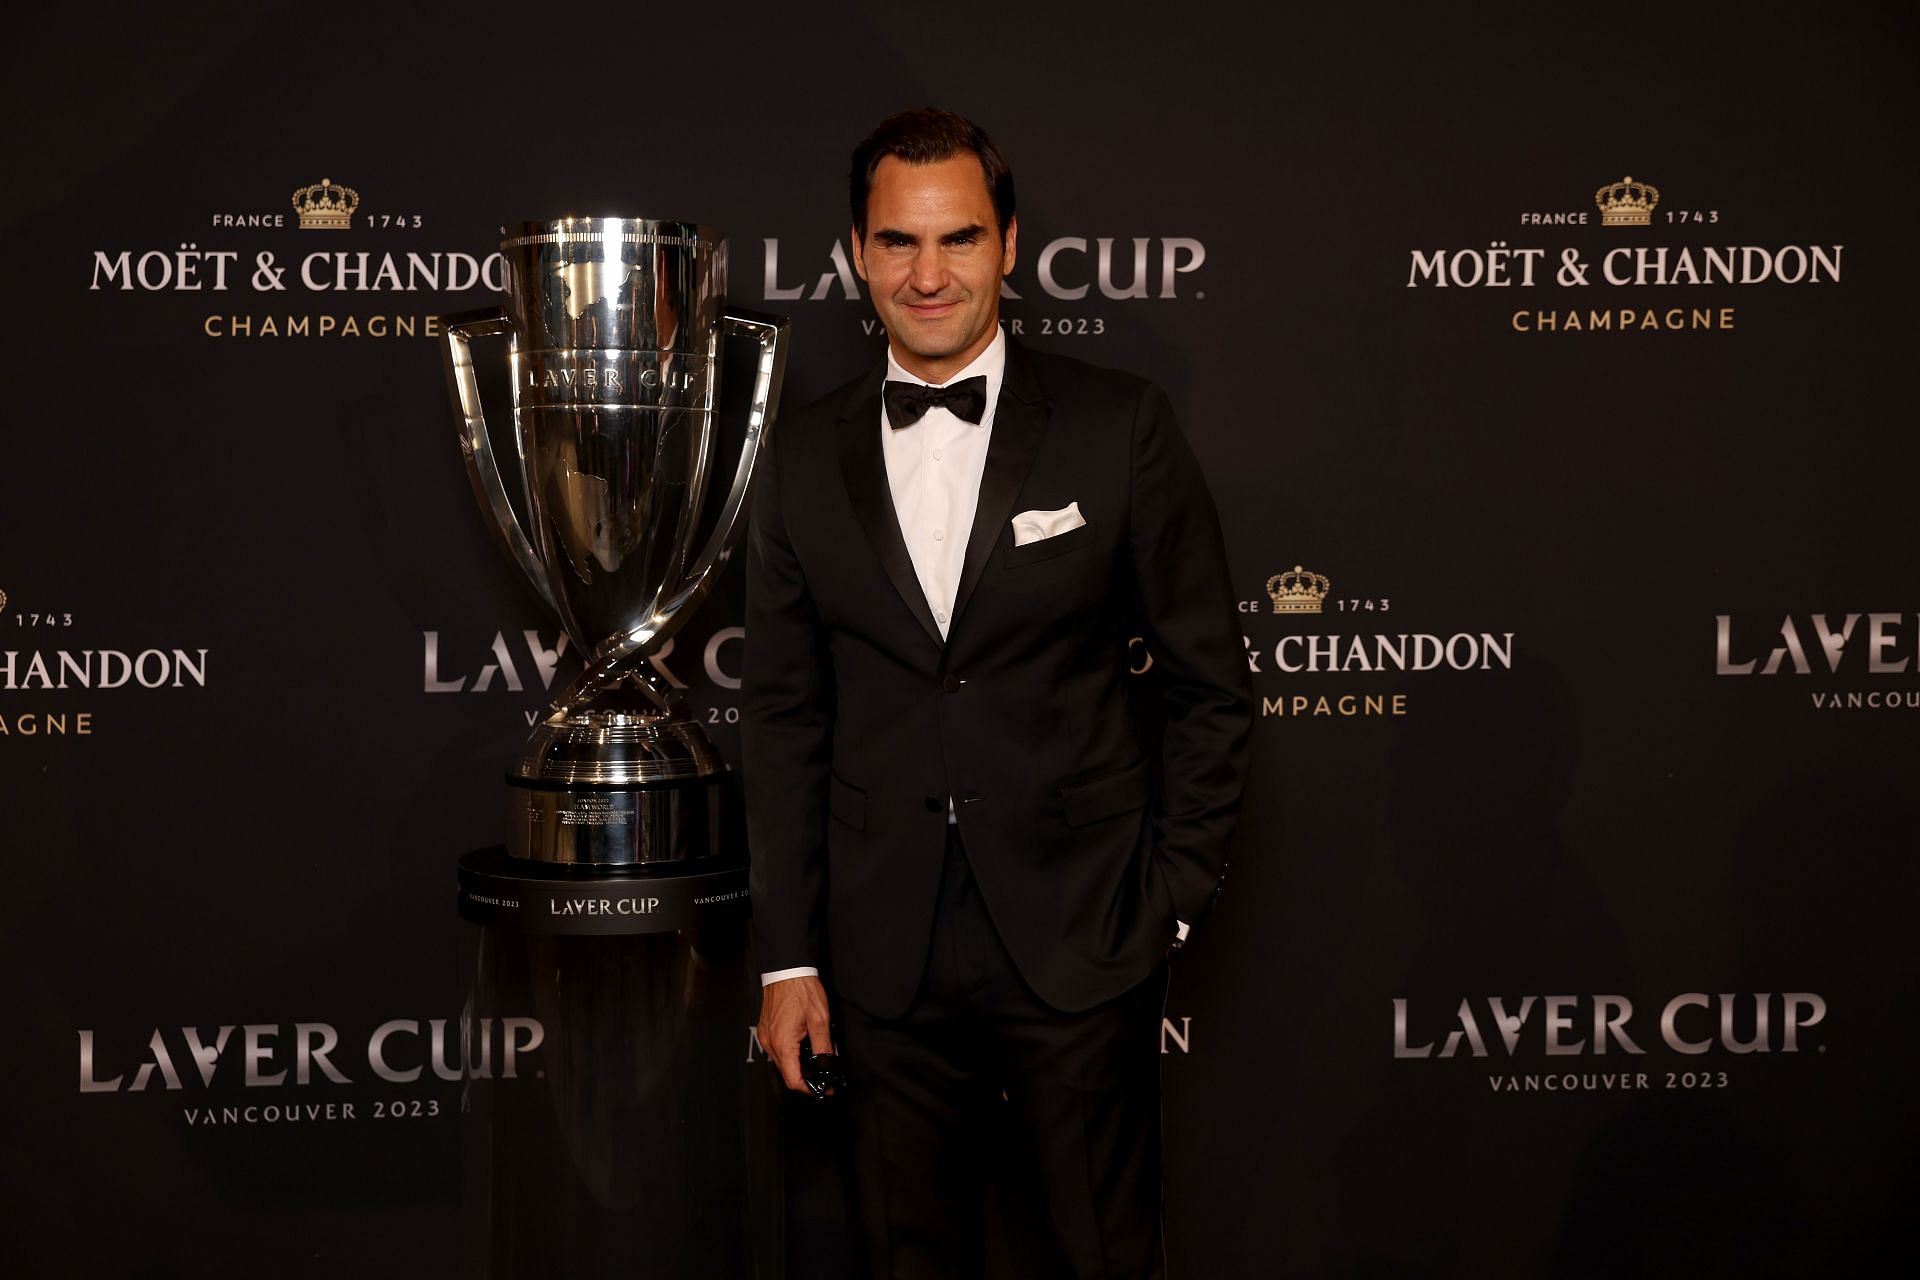 The Swiss at Laver Cup 2023